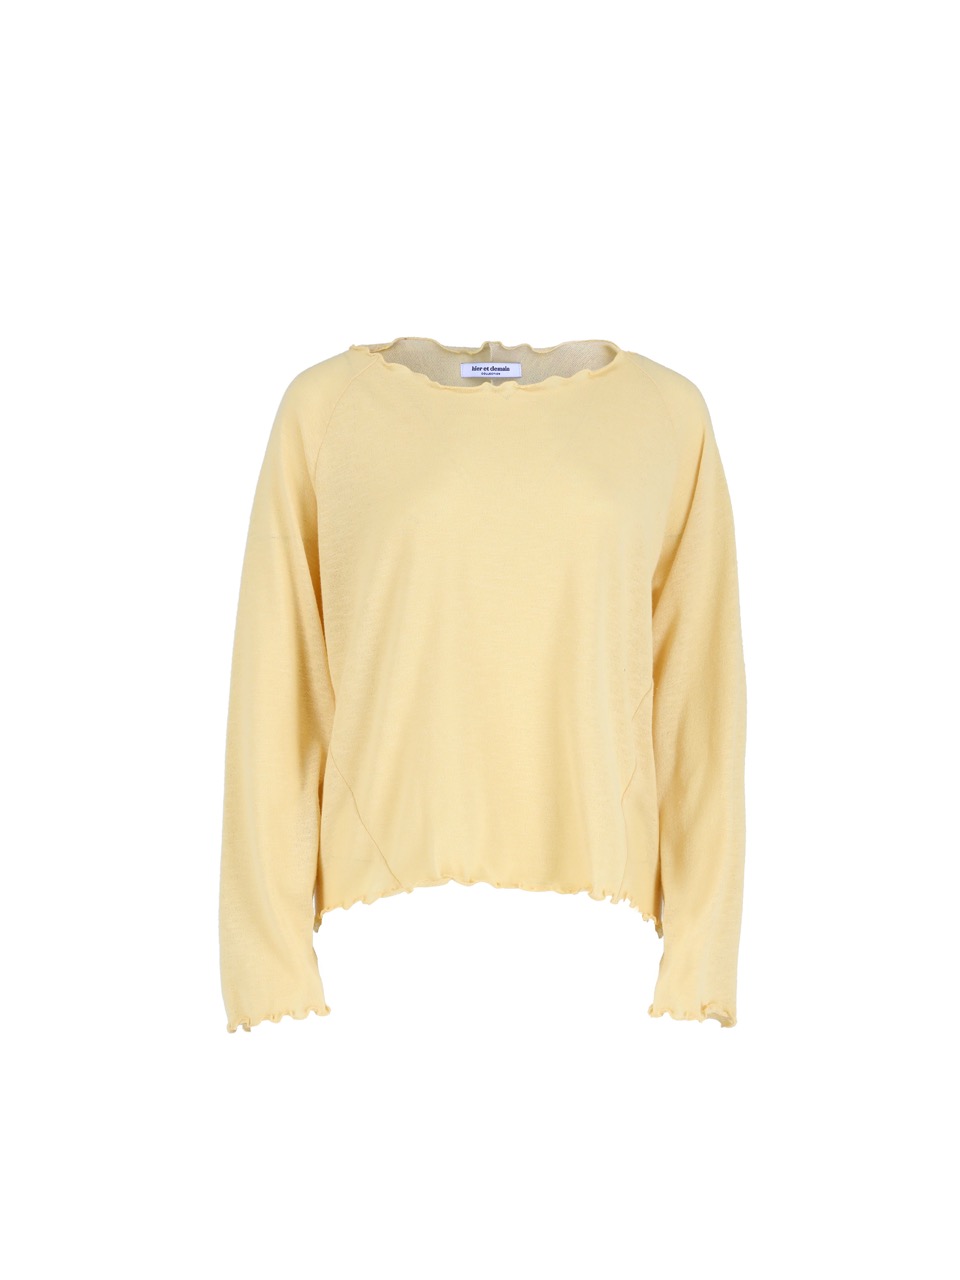 5P Boat neck Sleeve Knit top - Yellow